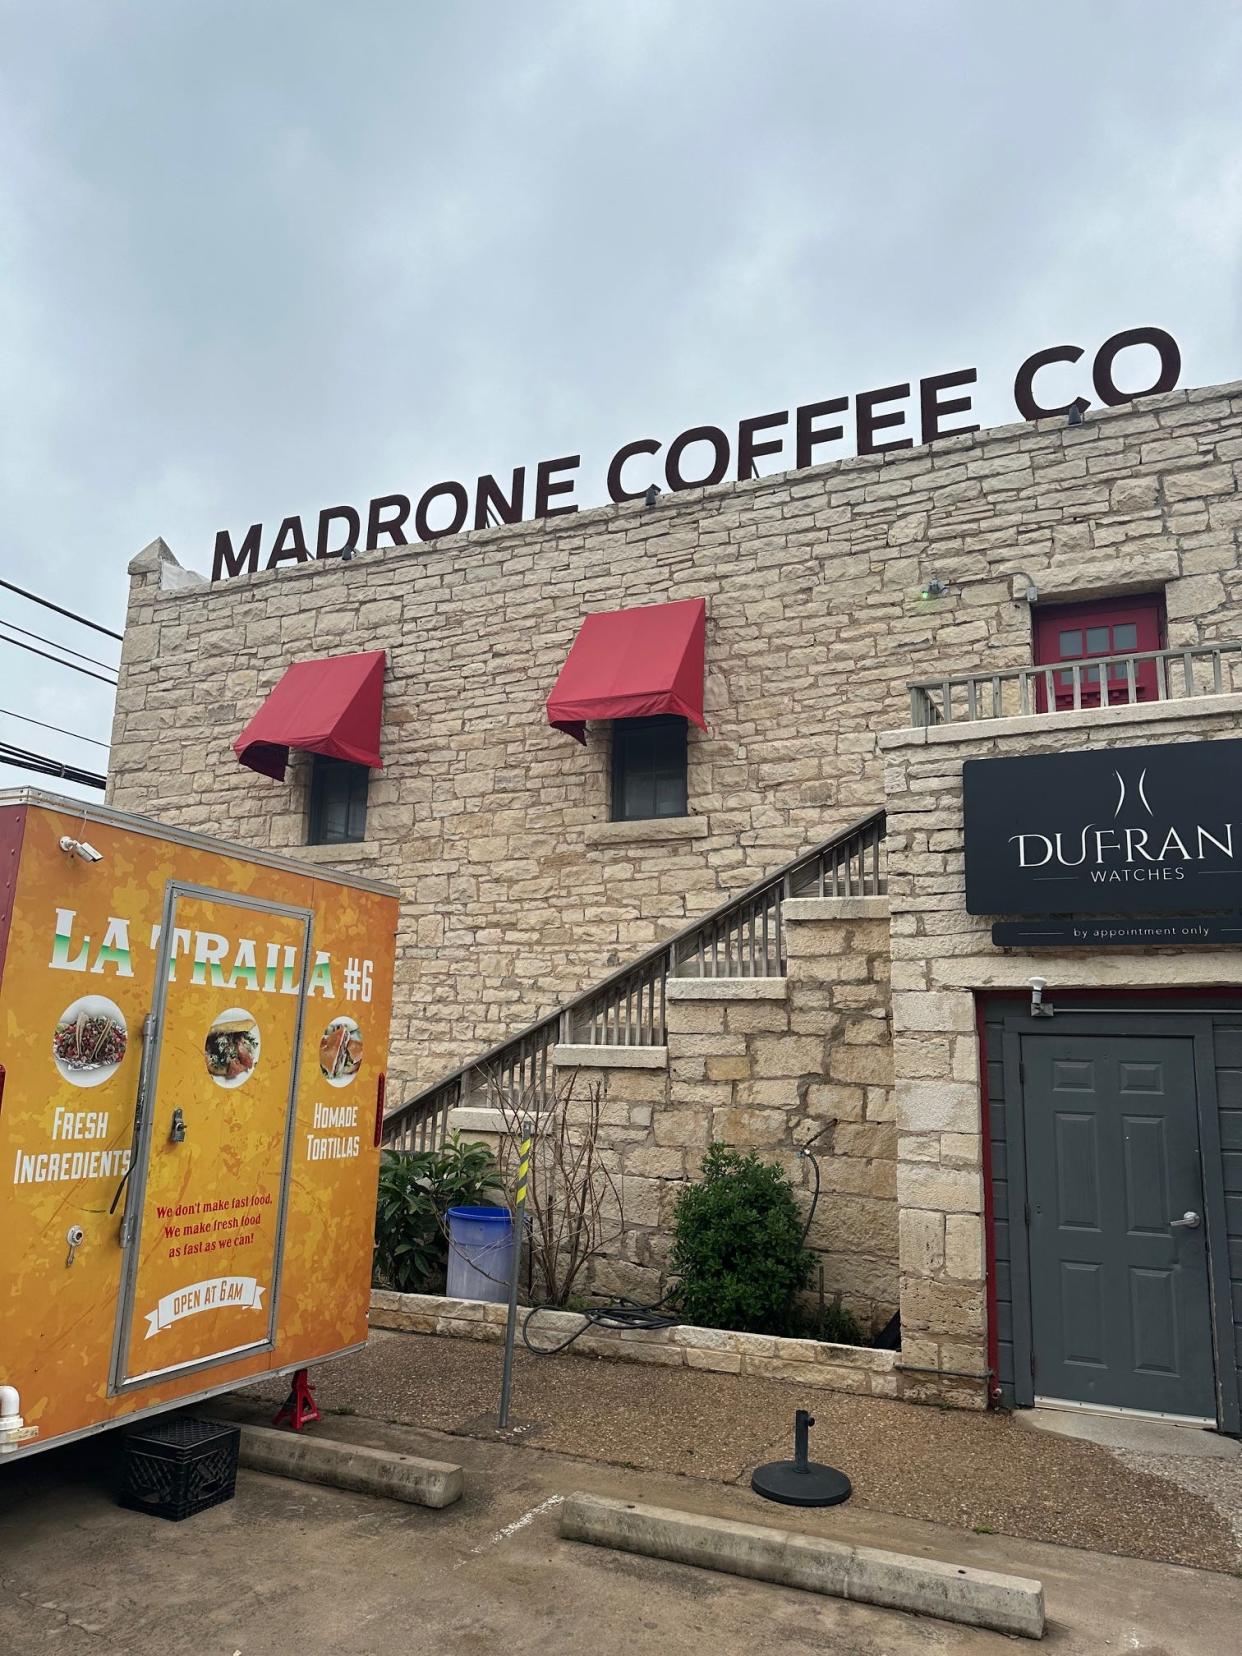 Madrone Coffee Co. was located in the historic Old Rock Store for three years before being shuttered in mid-April for unpaid rent.